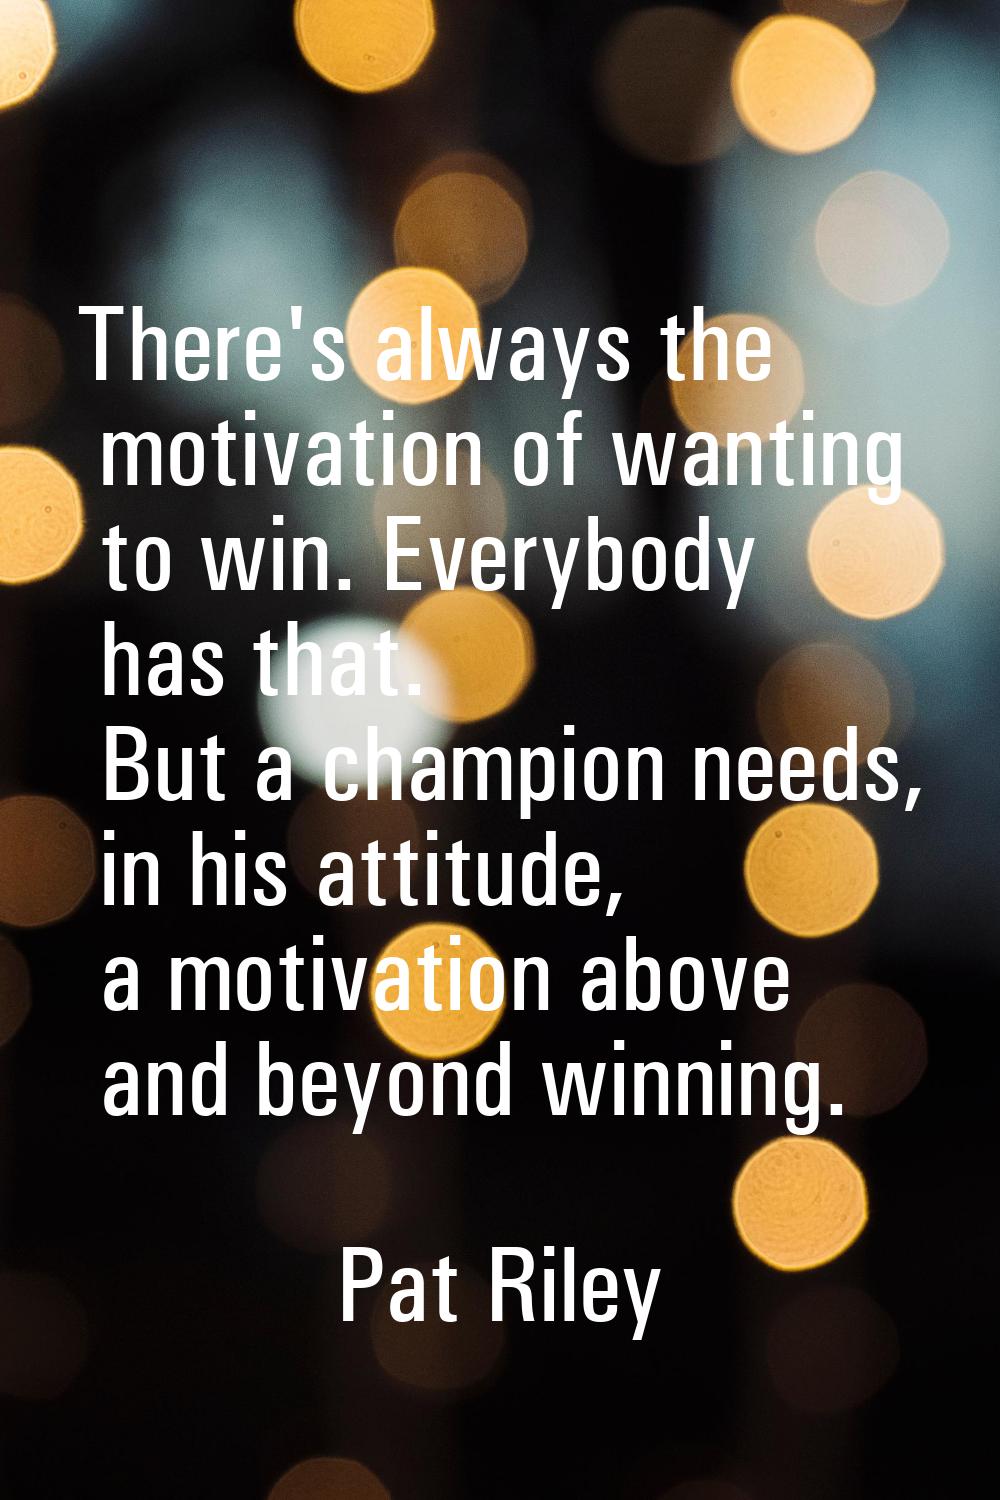 There's always the motivation of wanting to win. Everybody has that. But a champion needs, in his a